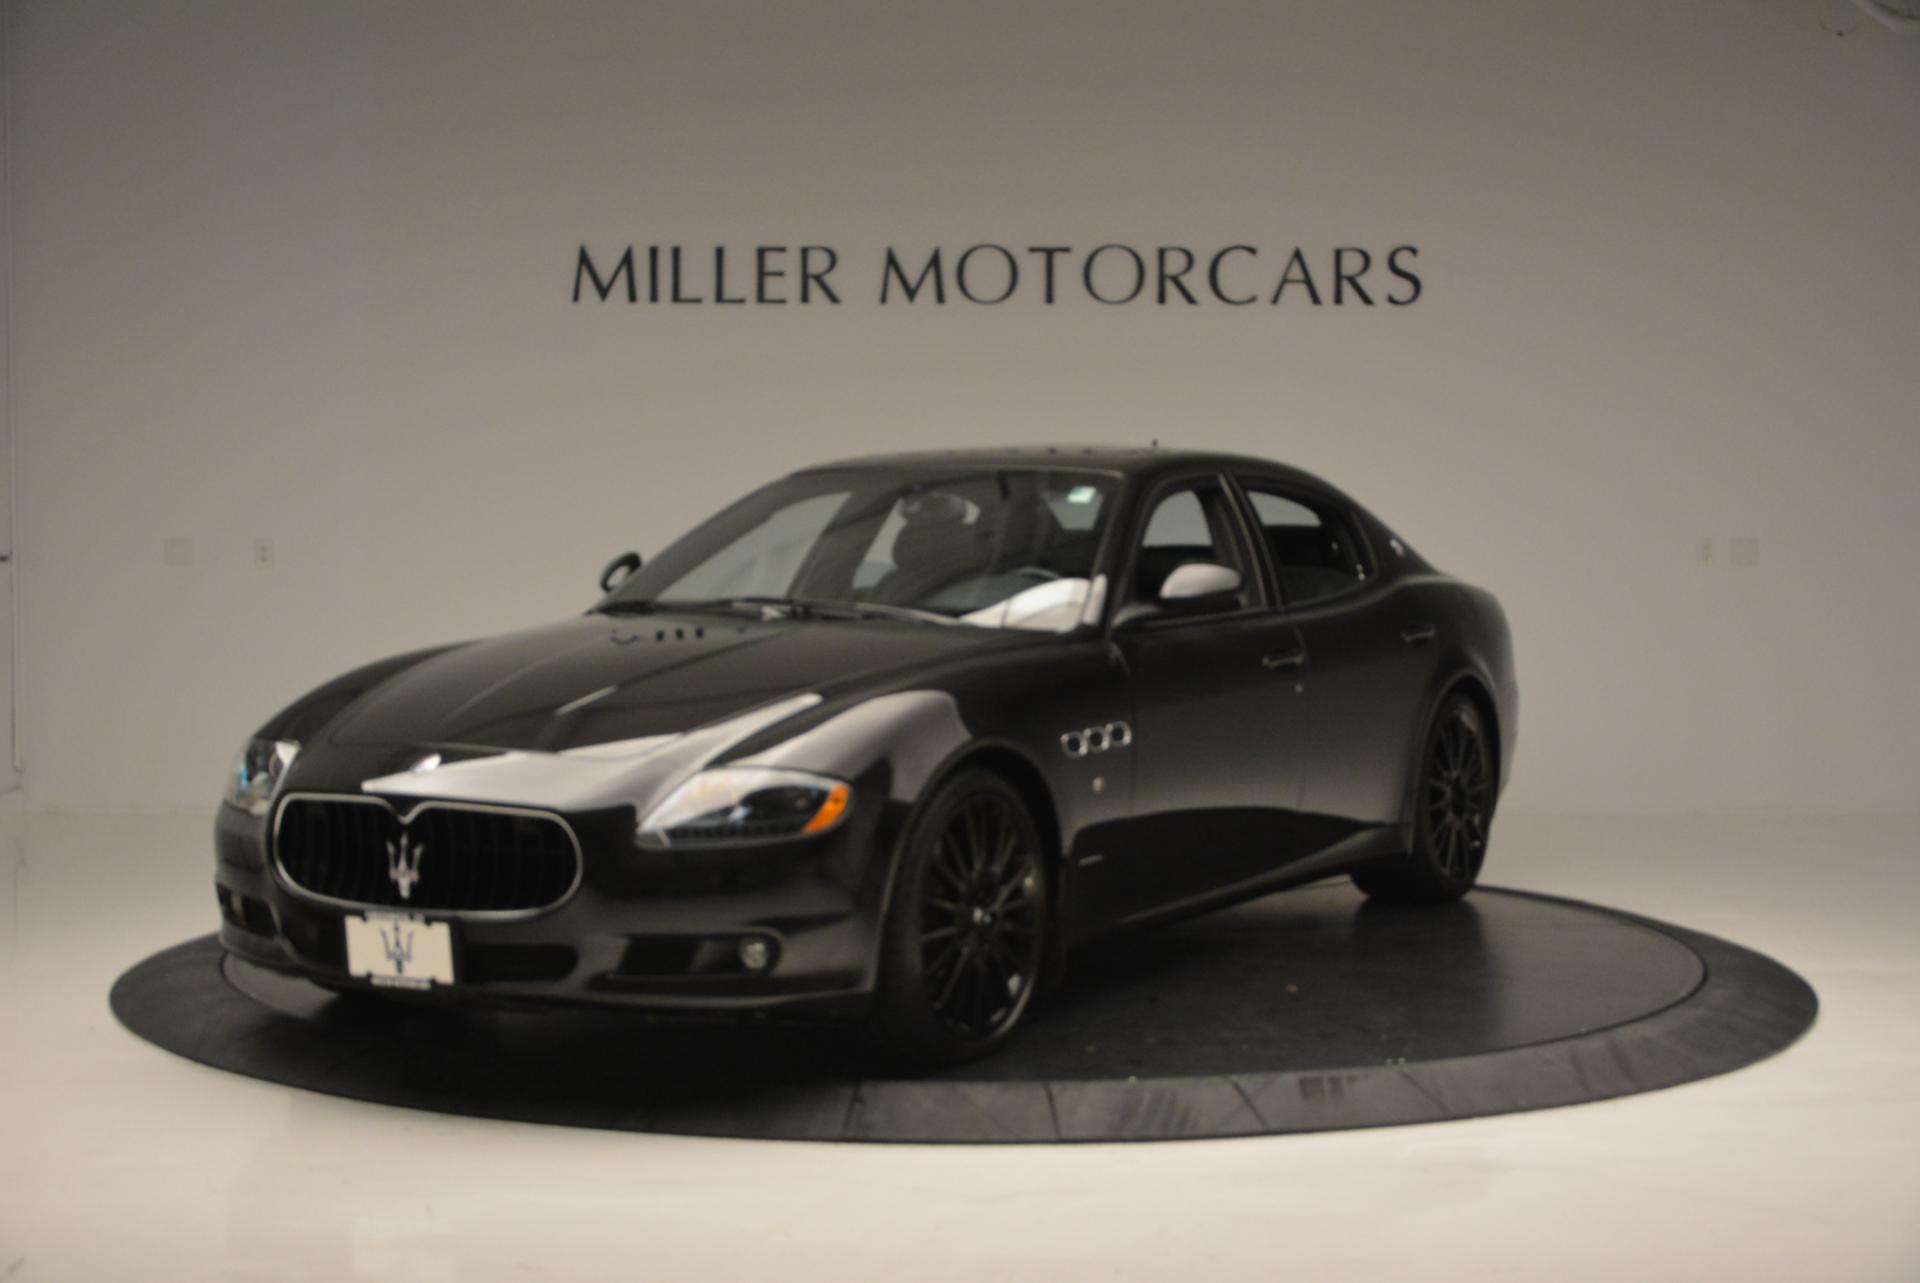 Used 2011 Maserati Quattroporte Sport GT S for sale Sold at Rolls-Royce Motor Cars Greenwich in Greenwich CT 06830 1